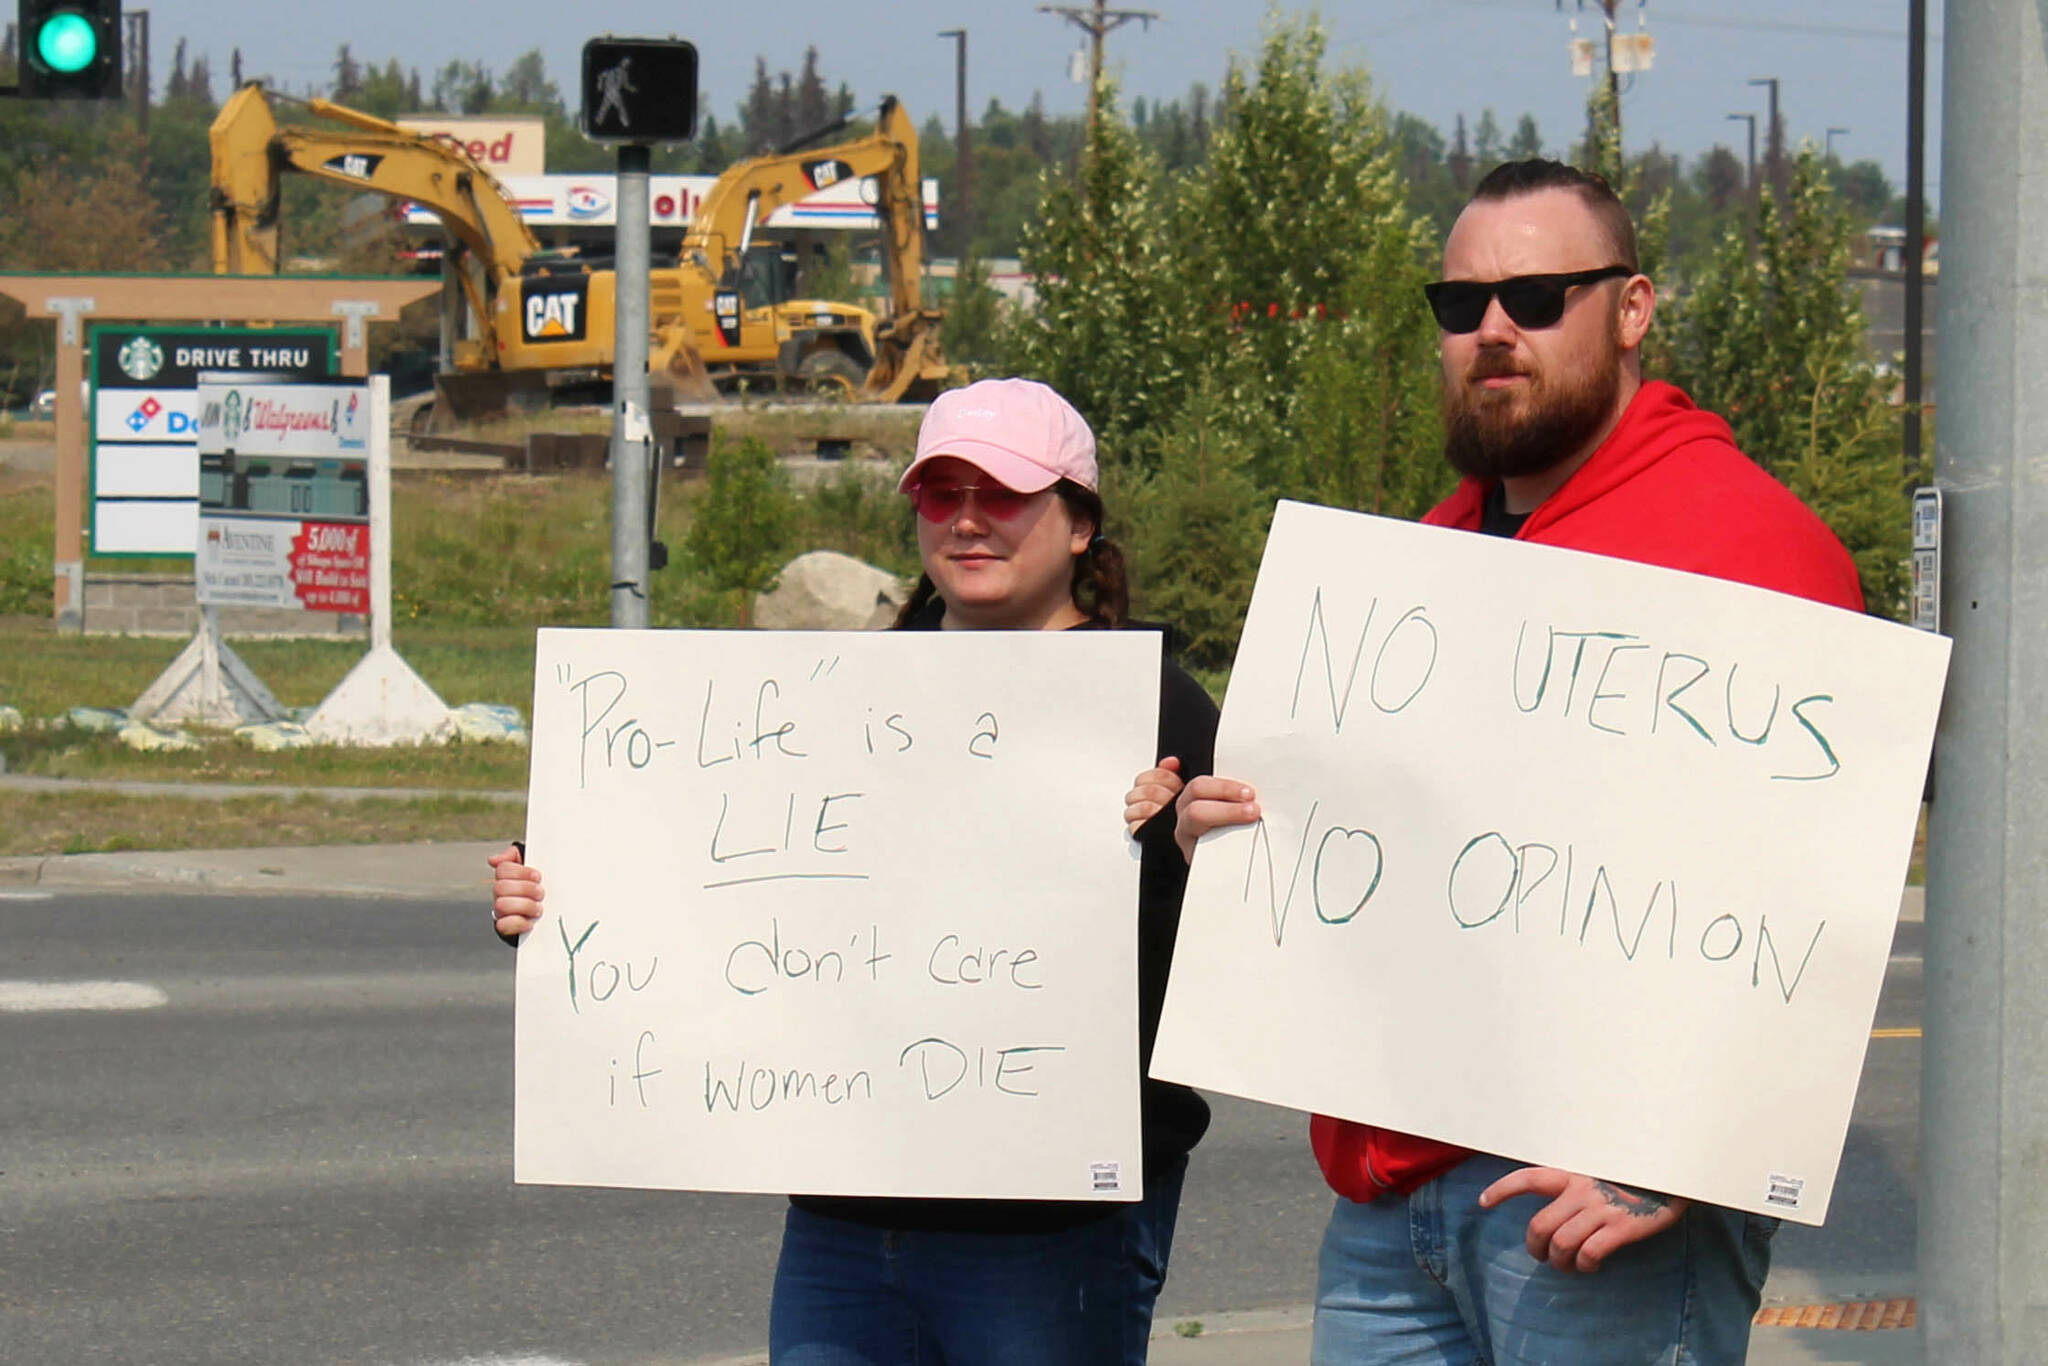 Megan Mitchell (left) and Nick McCoy (right) protest the U.S. Supreme Court’s overturning of Roe v. Wade at the intersection of the Kenai Spur and Sterling highways on Friday, June 24, 2022 in Soldotna, Alaska. (Ashlyn O’Hara/Peninsula Clarion)